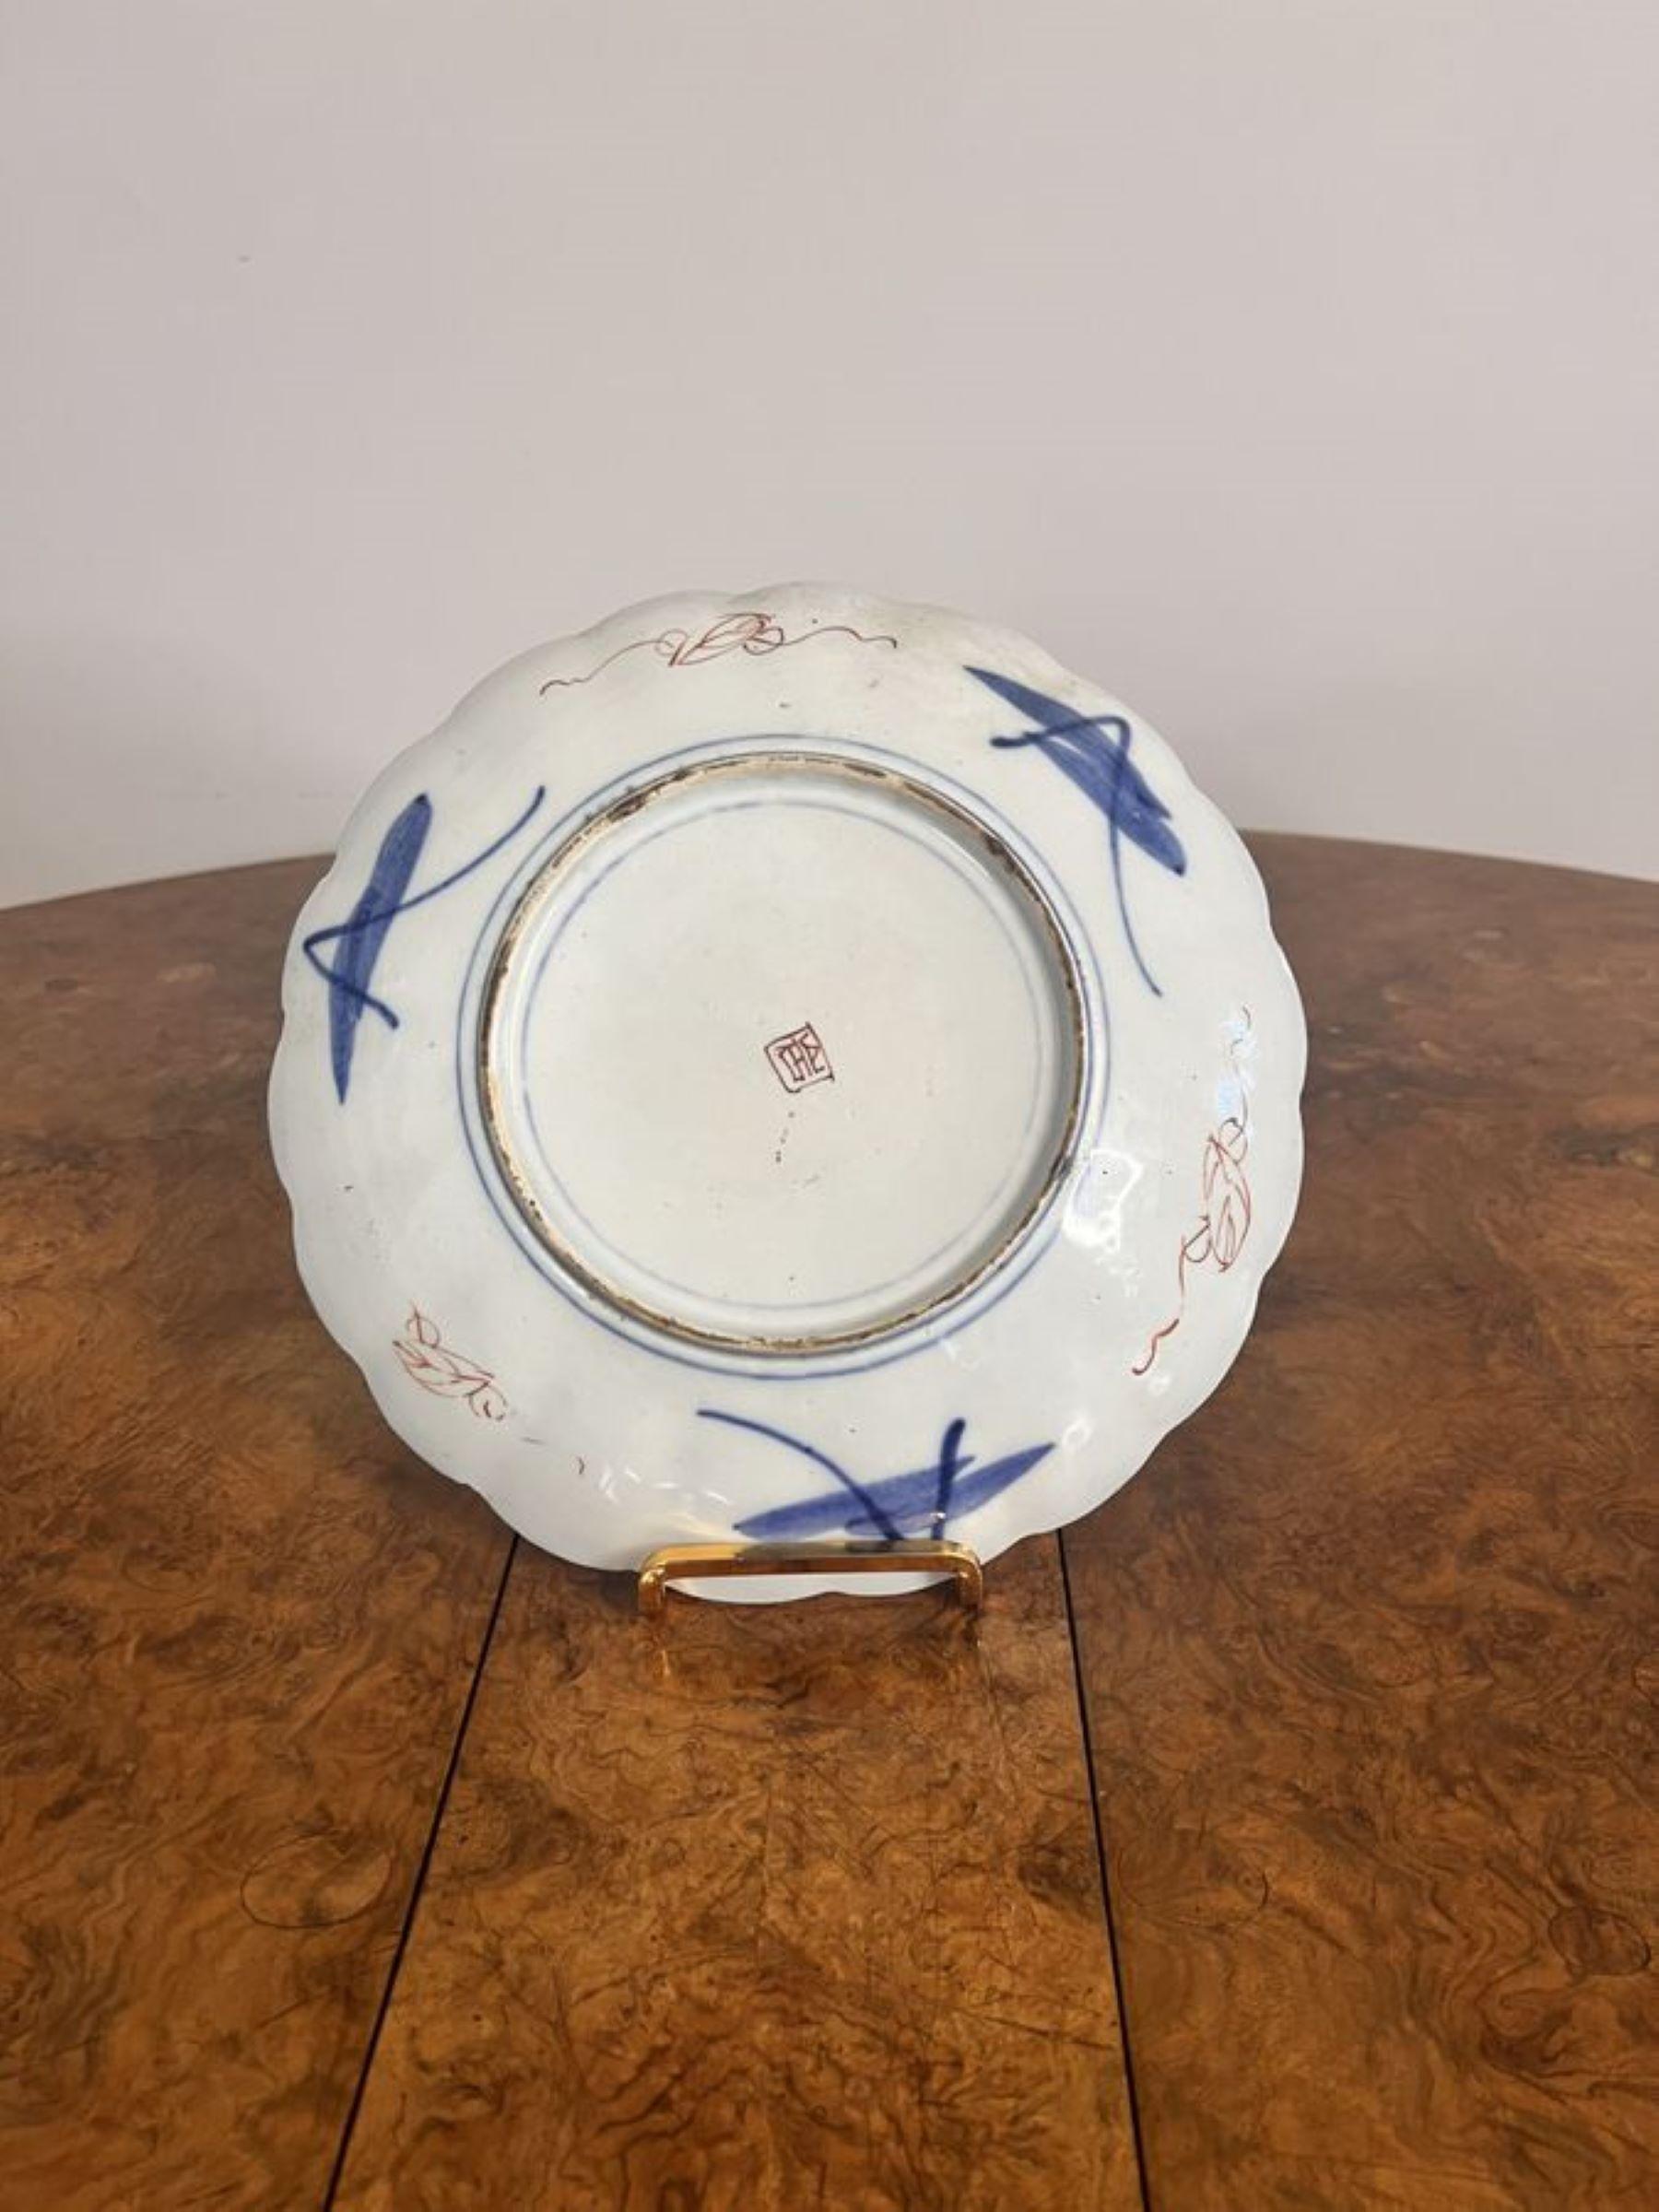 Fantastic quality pair of antique Japanese imari plates, having a pair of quality antique Japanese imari plates with scalloped shaped edges, fantastic decoration having flowers to the centre surrounded by panels with scrolls, flowers, leaves and